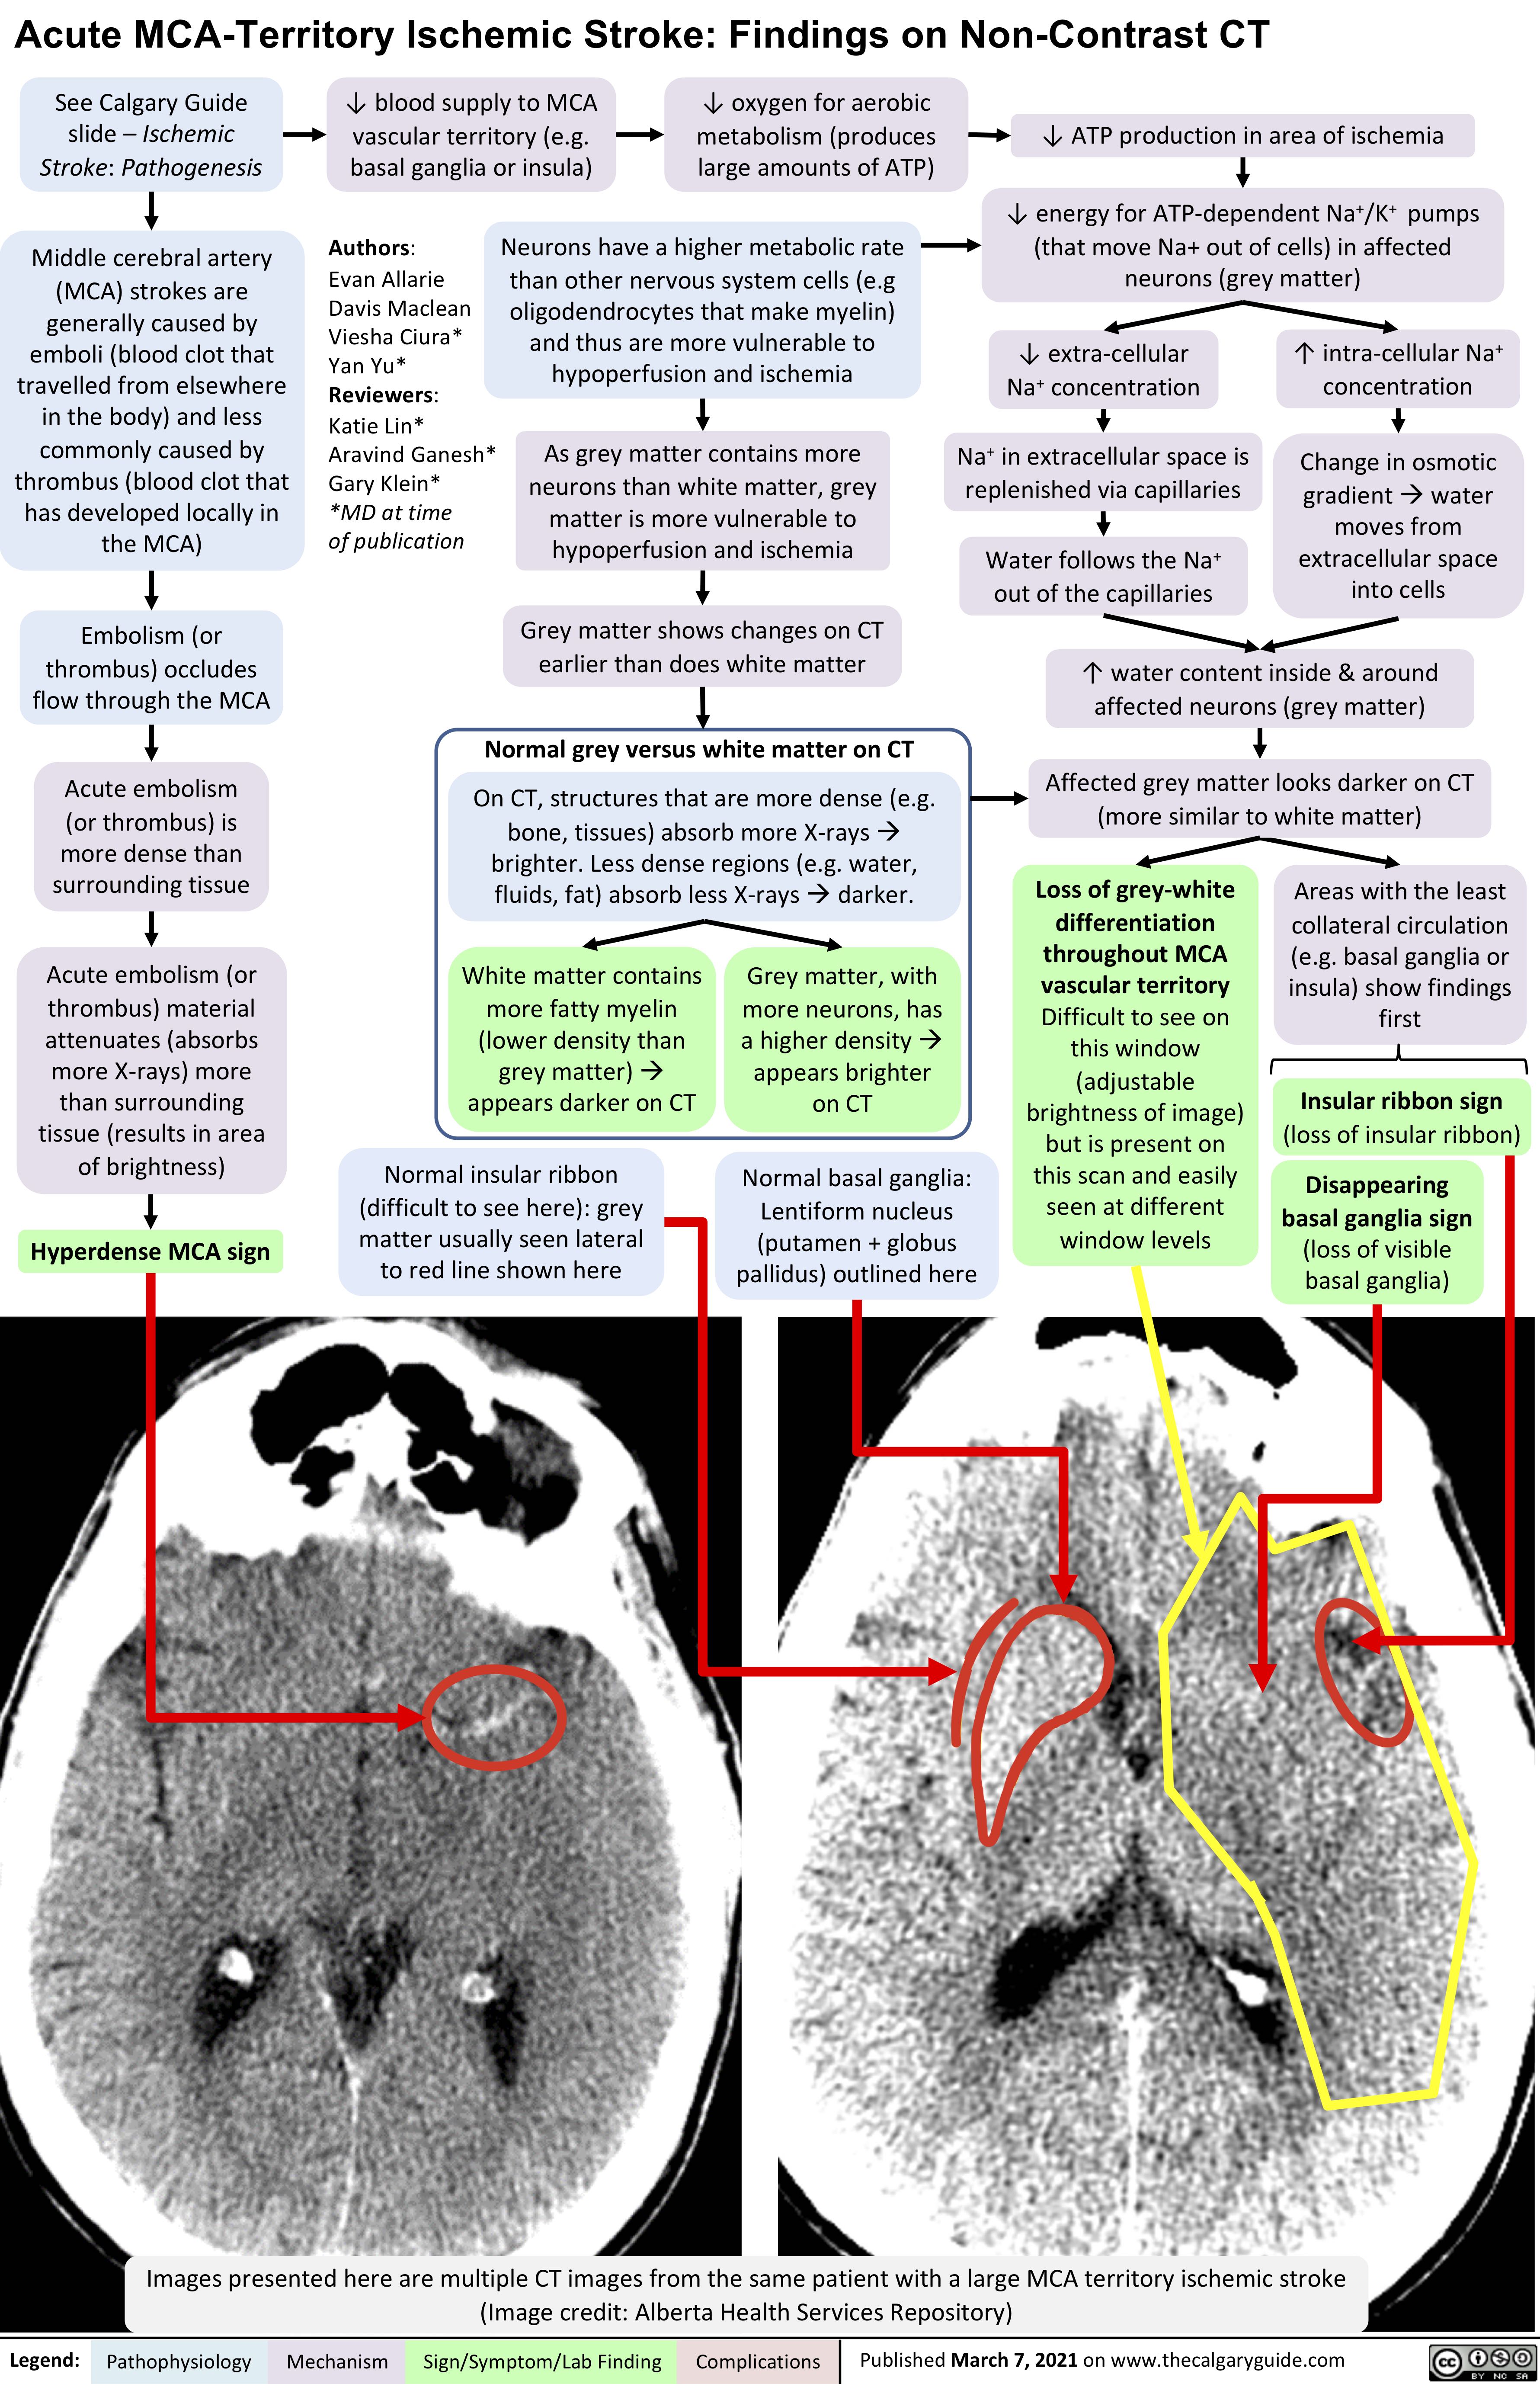 Acute MCA-Territory Ischemic Stroke: Findings on Non-Contrast CT
   See Calgary Guide slide – Ischemic Stroke: Pathogenesis
Middle cerebral artery (MCA) strokes are generally caused by emboli (blood clot that travelled from elsewhere in the body) and less commonly caused by thrombus (blood clot that has developed locally in the MCA)
Embolism (or thrombus) occludes flow through the MCA
Acute embolism
(or thrombus) is more dense than surrounding tissue
Acute embolism (or thrombus) material attenuates (absorbs more X-rays) more than surrounding tissue (results in area of brightness)
Hyperdense MCA sign
↓ blood supply to MCA vascular territory (e.g. basal ganglia or insula)
↓ oxygen for aerobic metabolism (produces large amounts of ATP)
↓ ATP production in area of ischemia
↓ energy for ATP-dependent Na+/K+ pumps (that move Na+ out of cells) in affected neurons (grey matter)
        Neurons have a higher metabolic rate than other nervous system cells (e.g oligodendrocytes that make myelin) and thus are more vulnerable to hypoperfusion and ischemia
As grey matter contains more neurons than white matter, grey matter is more vulnerable to hypoperfusion and ischemia
Grey matter shows changes on CT earlier than does white matter
Normal grey versus white matter on CT
On CT, structures that are more dense (e.g. bone, tissues) absorb more X-raysà brighter. Less dense regions (e.g. water, fluids, fat) absorb less X-raysàdarker.
 Authors:
Evan Allarie Davis Maclean Viesha Ciura* Yan Yu* Reviewers:
Katie Lin* Aravind Ganesh* Gary Klein*
*MD at time
of publication
↓ extra-cellular Na+ concentration
Na+ in extracellular space is replenished via capillaries
Water follows the Na+ out of the capillaries
↑ intra-cellular Na+ concentration
Change in osmotic gradientàwater moves from extracellular space into cells
                   ↑ water content inside & around affected neurons (grey matter)
Affected grey matter looks darker on CT (more similar to white matter)
                 White matter contains more fatty myelin (lower density than grey matter)à appears darker on CT
Normal insular ribbon (difficult to see here): grey matter usually seen lateral to red line shown here
Grey matter, with more neurons, has a higher densityà appears brighter on CT
Normal basal ganglia: Lentiform nucleus (putamen + globus pallidus) outlined here
Loss of grey-white differentiation throughout MCA vascular territory Difficult to see on this window (adjustable brightness of image) but is present on this scan and easily seen at different window levels
Areas with the least collateral circulation
(e.g. basal ganglia or insula) show findings first
Insular ribbon sign
(loss of insular ribbon)
Disappearing basal ganglia sign (loss of visible basal ganglia)
                Comparison to normal anatomy helps outline pathologic findings
 Comparison to normal anatomy helps outline pathologic findings
 Images presented here are multiple CT images from the same patient with a large MCA territory ischemic stroke (Image credit: Alberta Health Services Repository)
 Legend:
 Pathophysiology
 Mechanism
 Sign/Symptom/Lab Finding
  Complications
 Published March 7, 2021 on www.thecalgaryguide.com
 